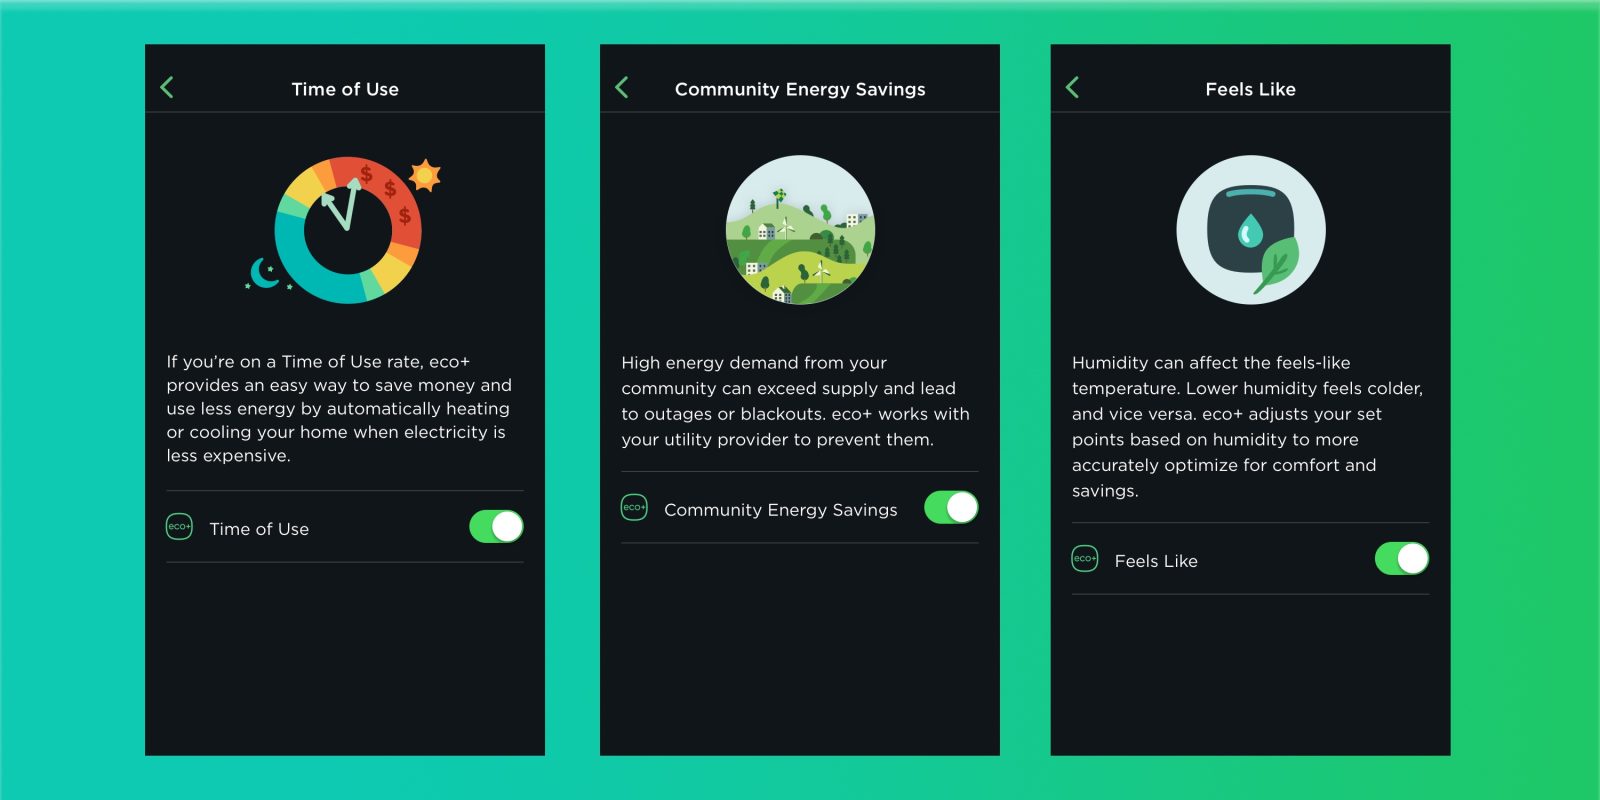 Ecobee Eco+ smart thermostat features